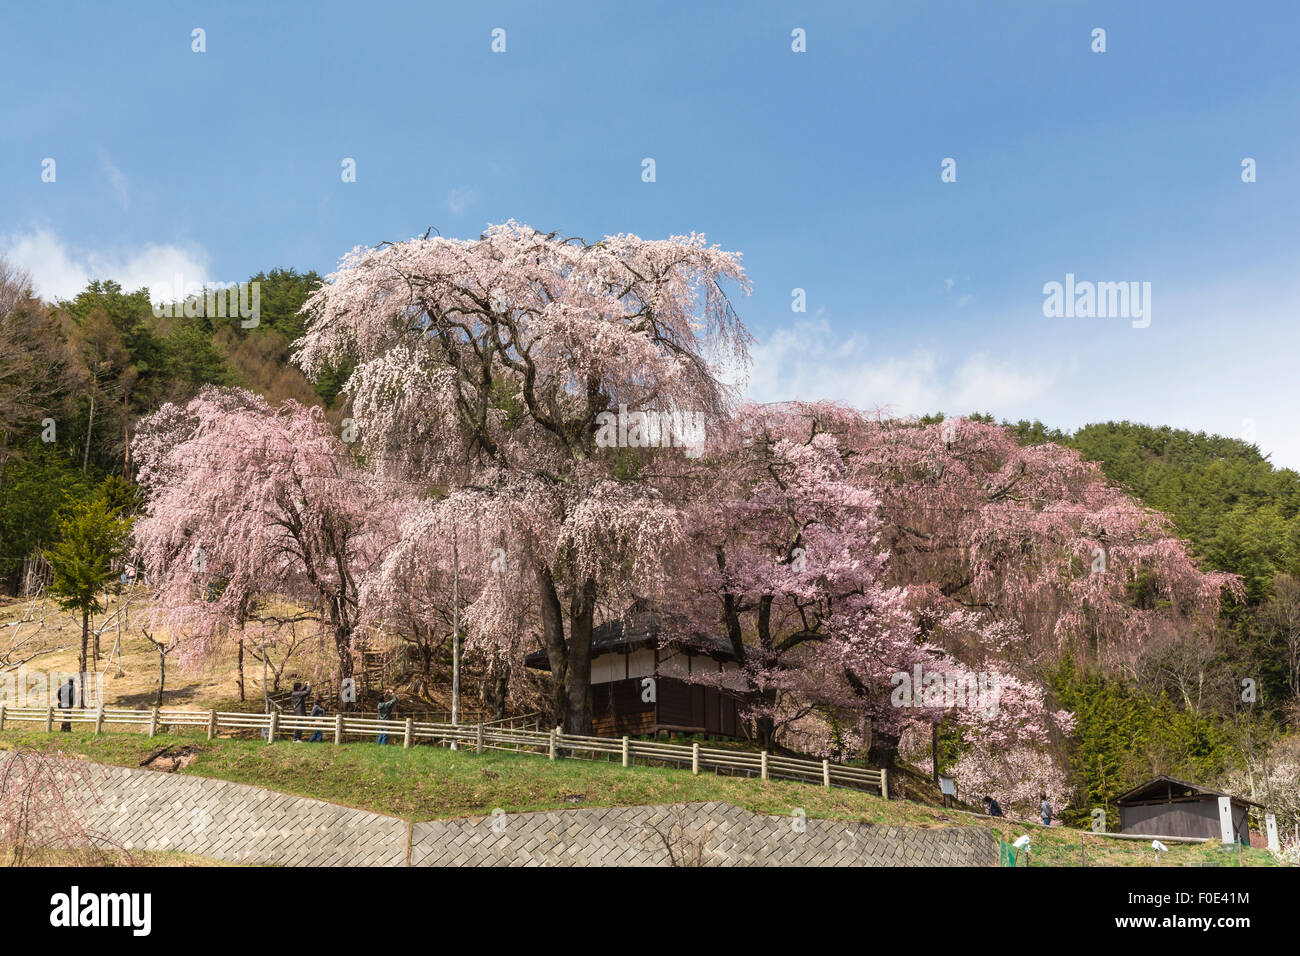 Cherry blossoms at Takato Castle Site in Japan Stock Photo